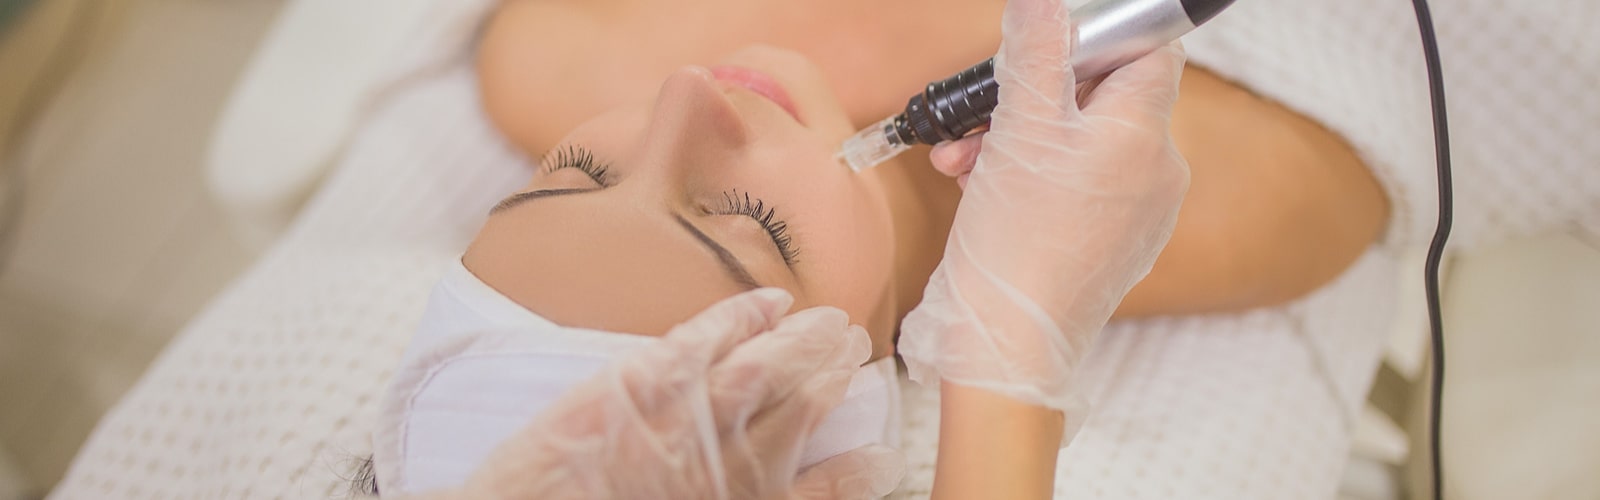 5 Face Laser Treatments and How They Can Help